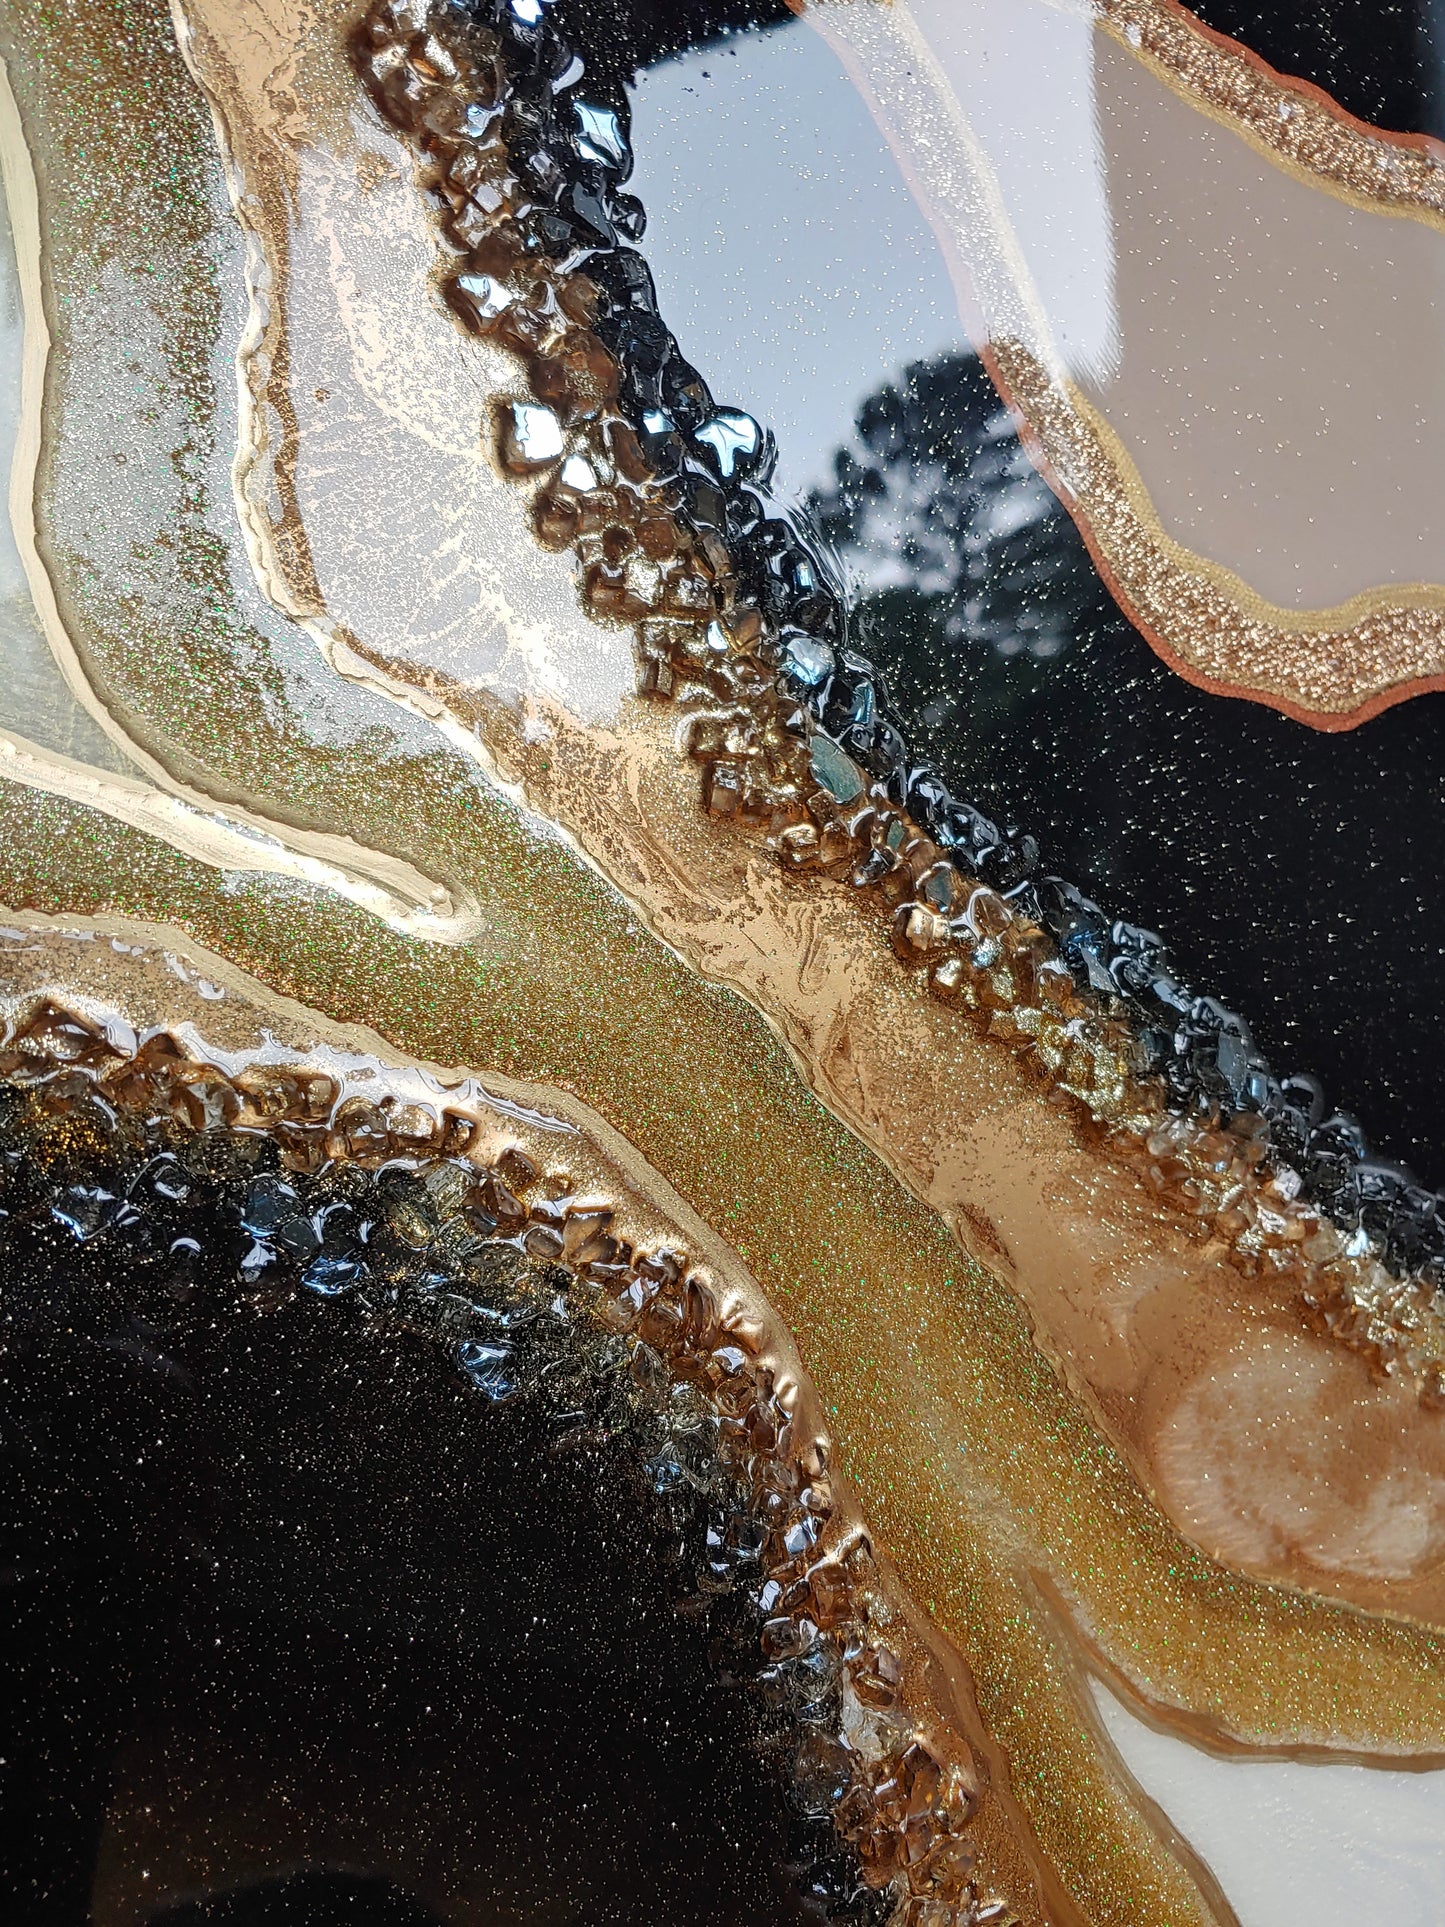 Time Passing-Black, cream and gold geode artwork-24x48